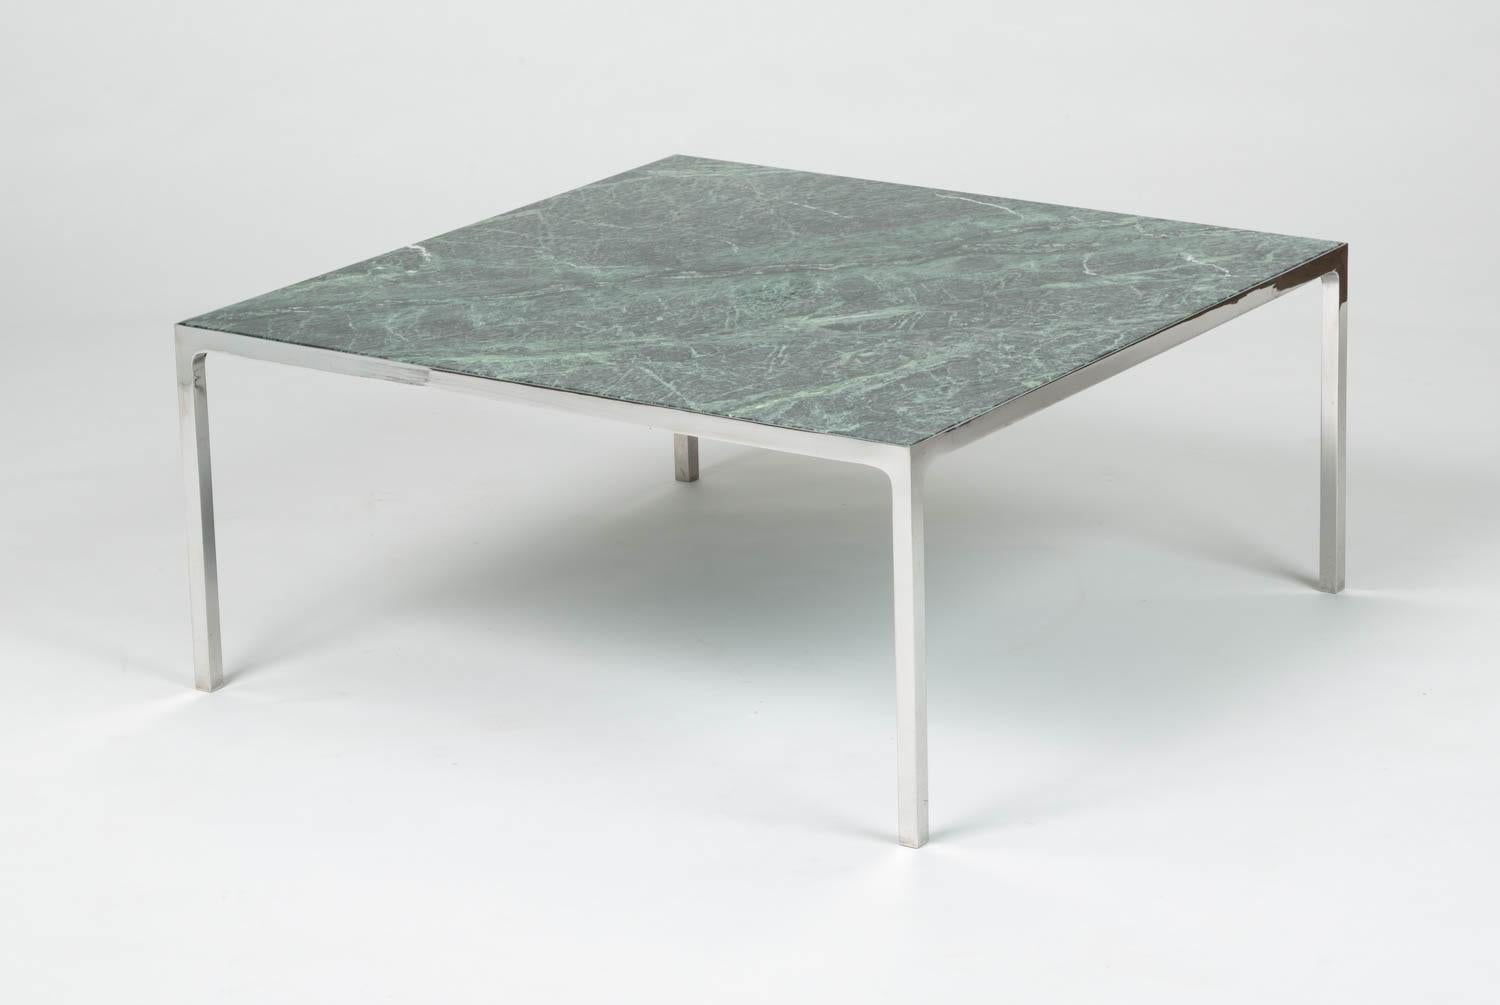 Polished stainless steel coffee table with green marble top by Nicos Zographos from the 1960s. The Italian marble is inset into the clean minimalist steel frame. We have a pair available and they are priced individually. When placed next to each